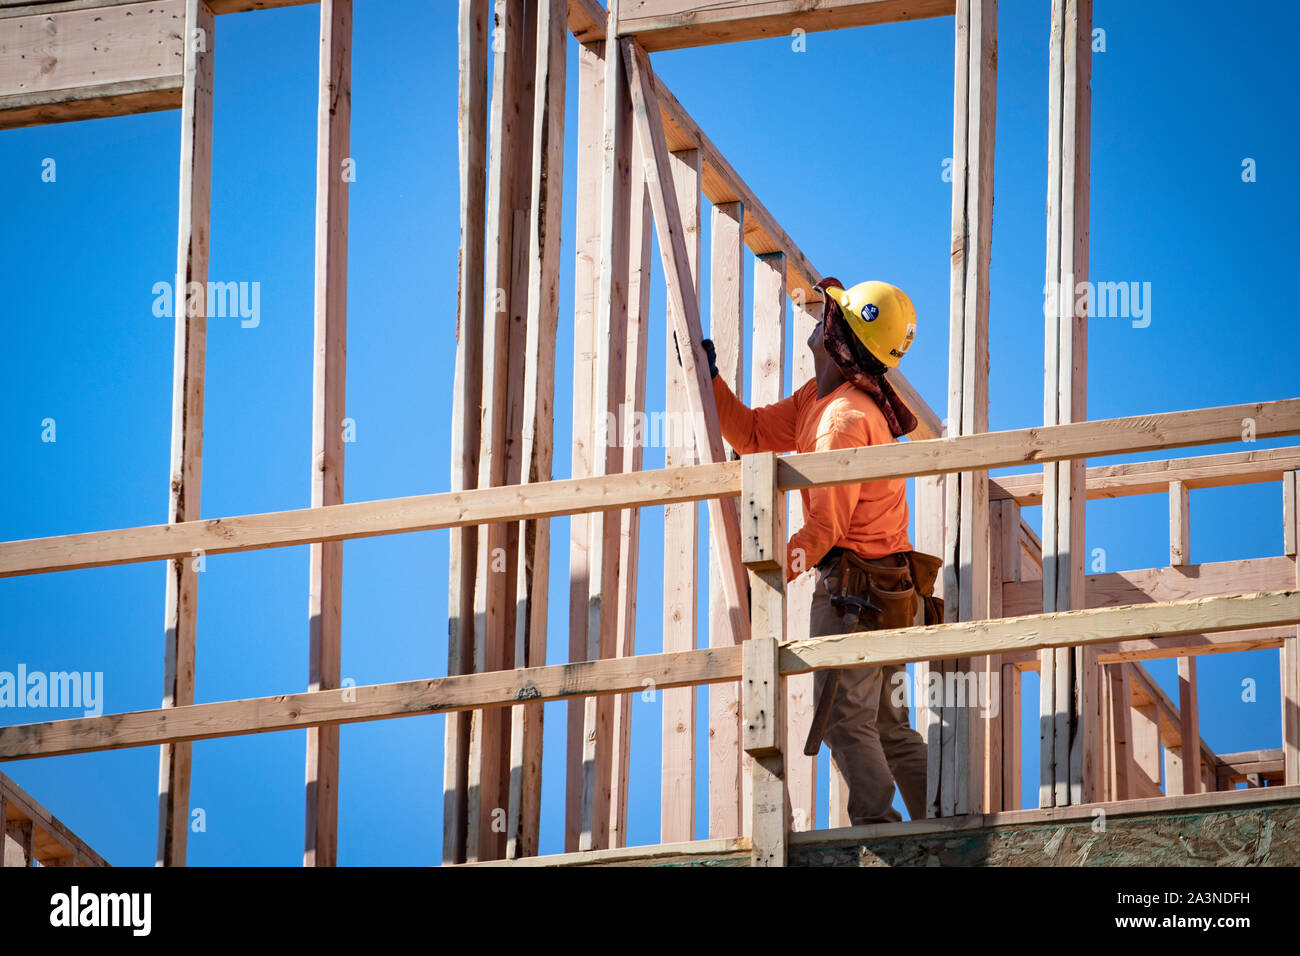 Construction worker in safety gear framing a large residential building on a hot sunny day. Stock Photo